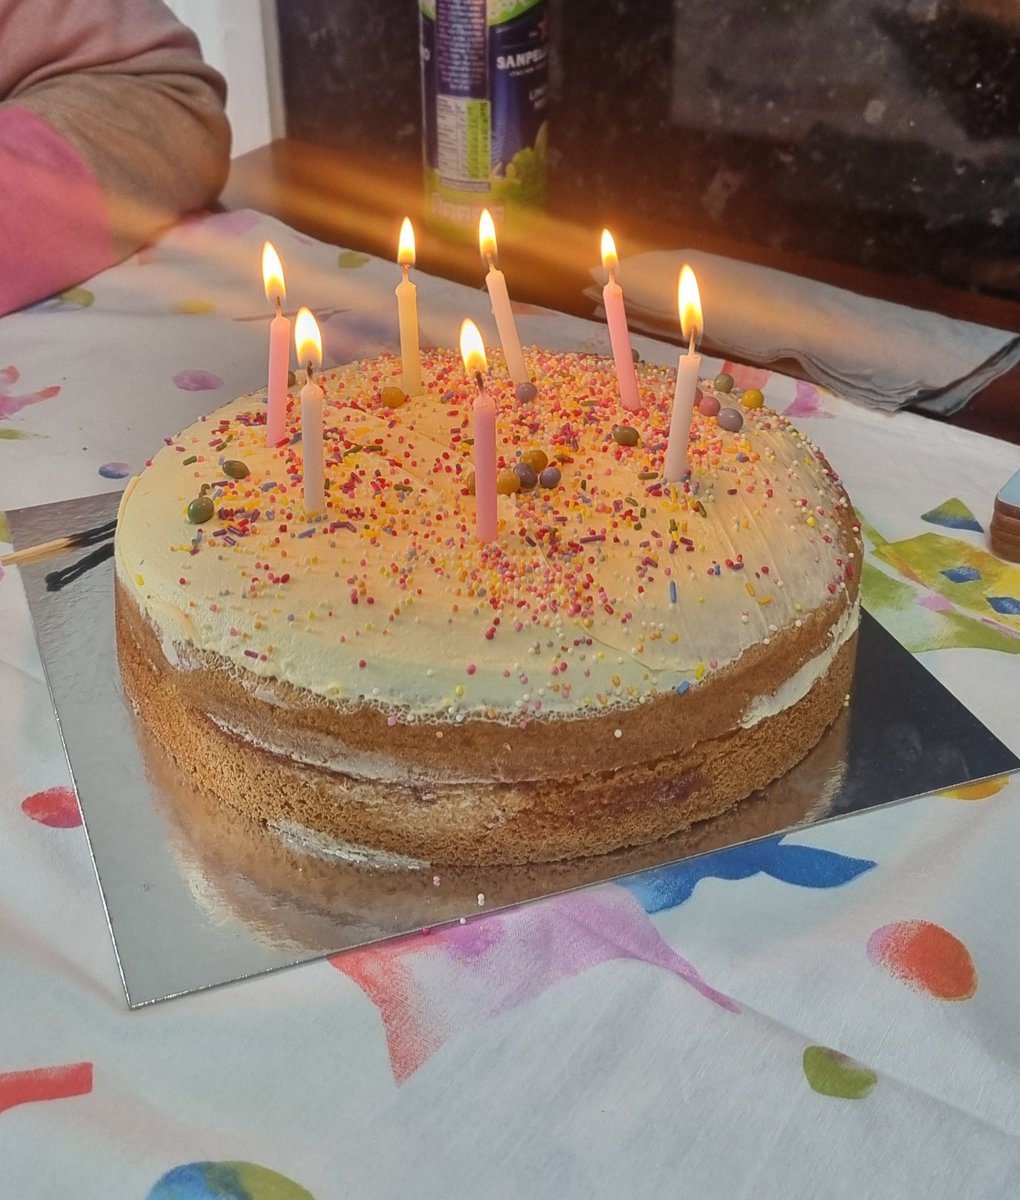 Came home from half day at work to a surprise mini tea party thanks to the best mam and nan ever!! Only us three and the dog but it wad perfect!! 36 today and still spoilt, let's hope chapter 36 is a good one!! 🥰🥳🎂🩷xxxx #chapter36 #birthdaygirl